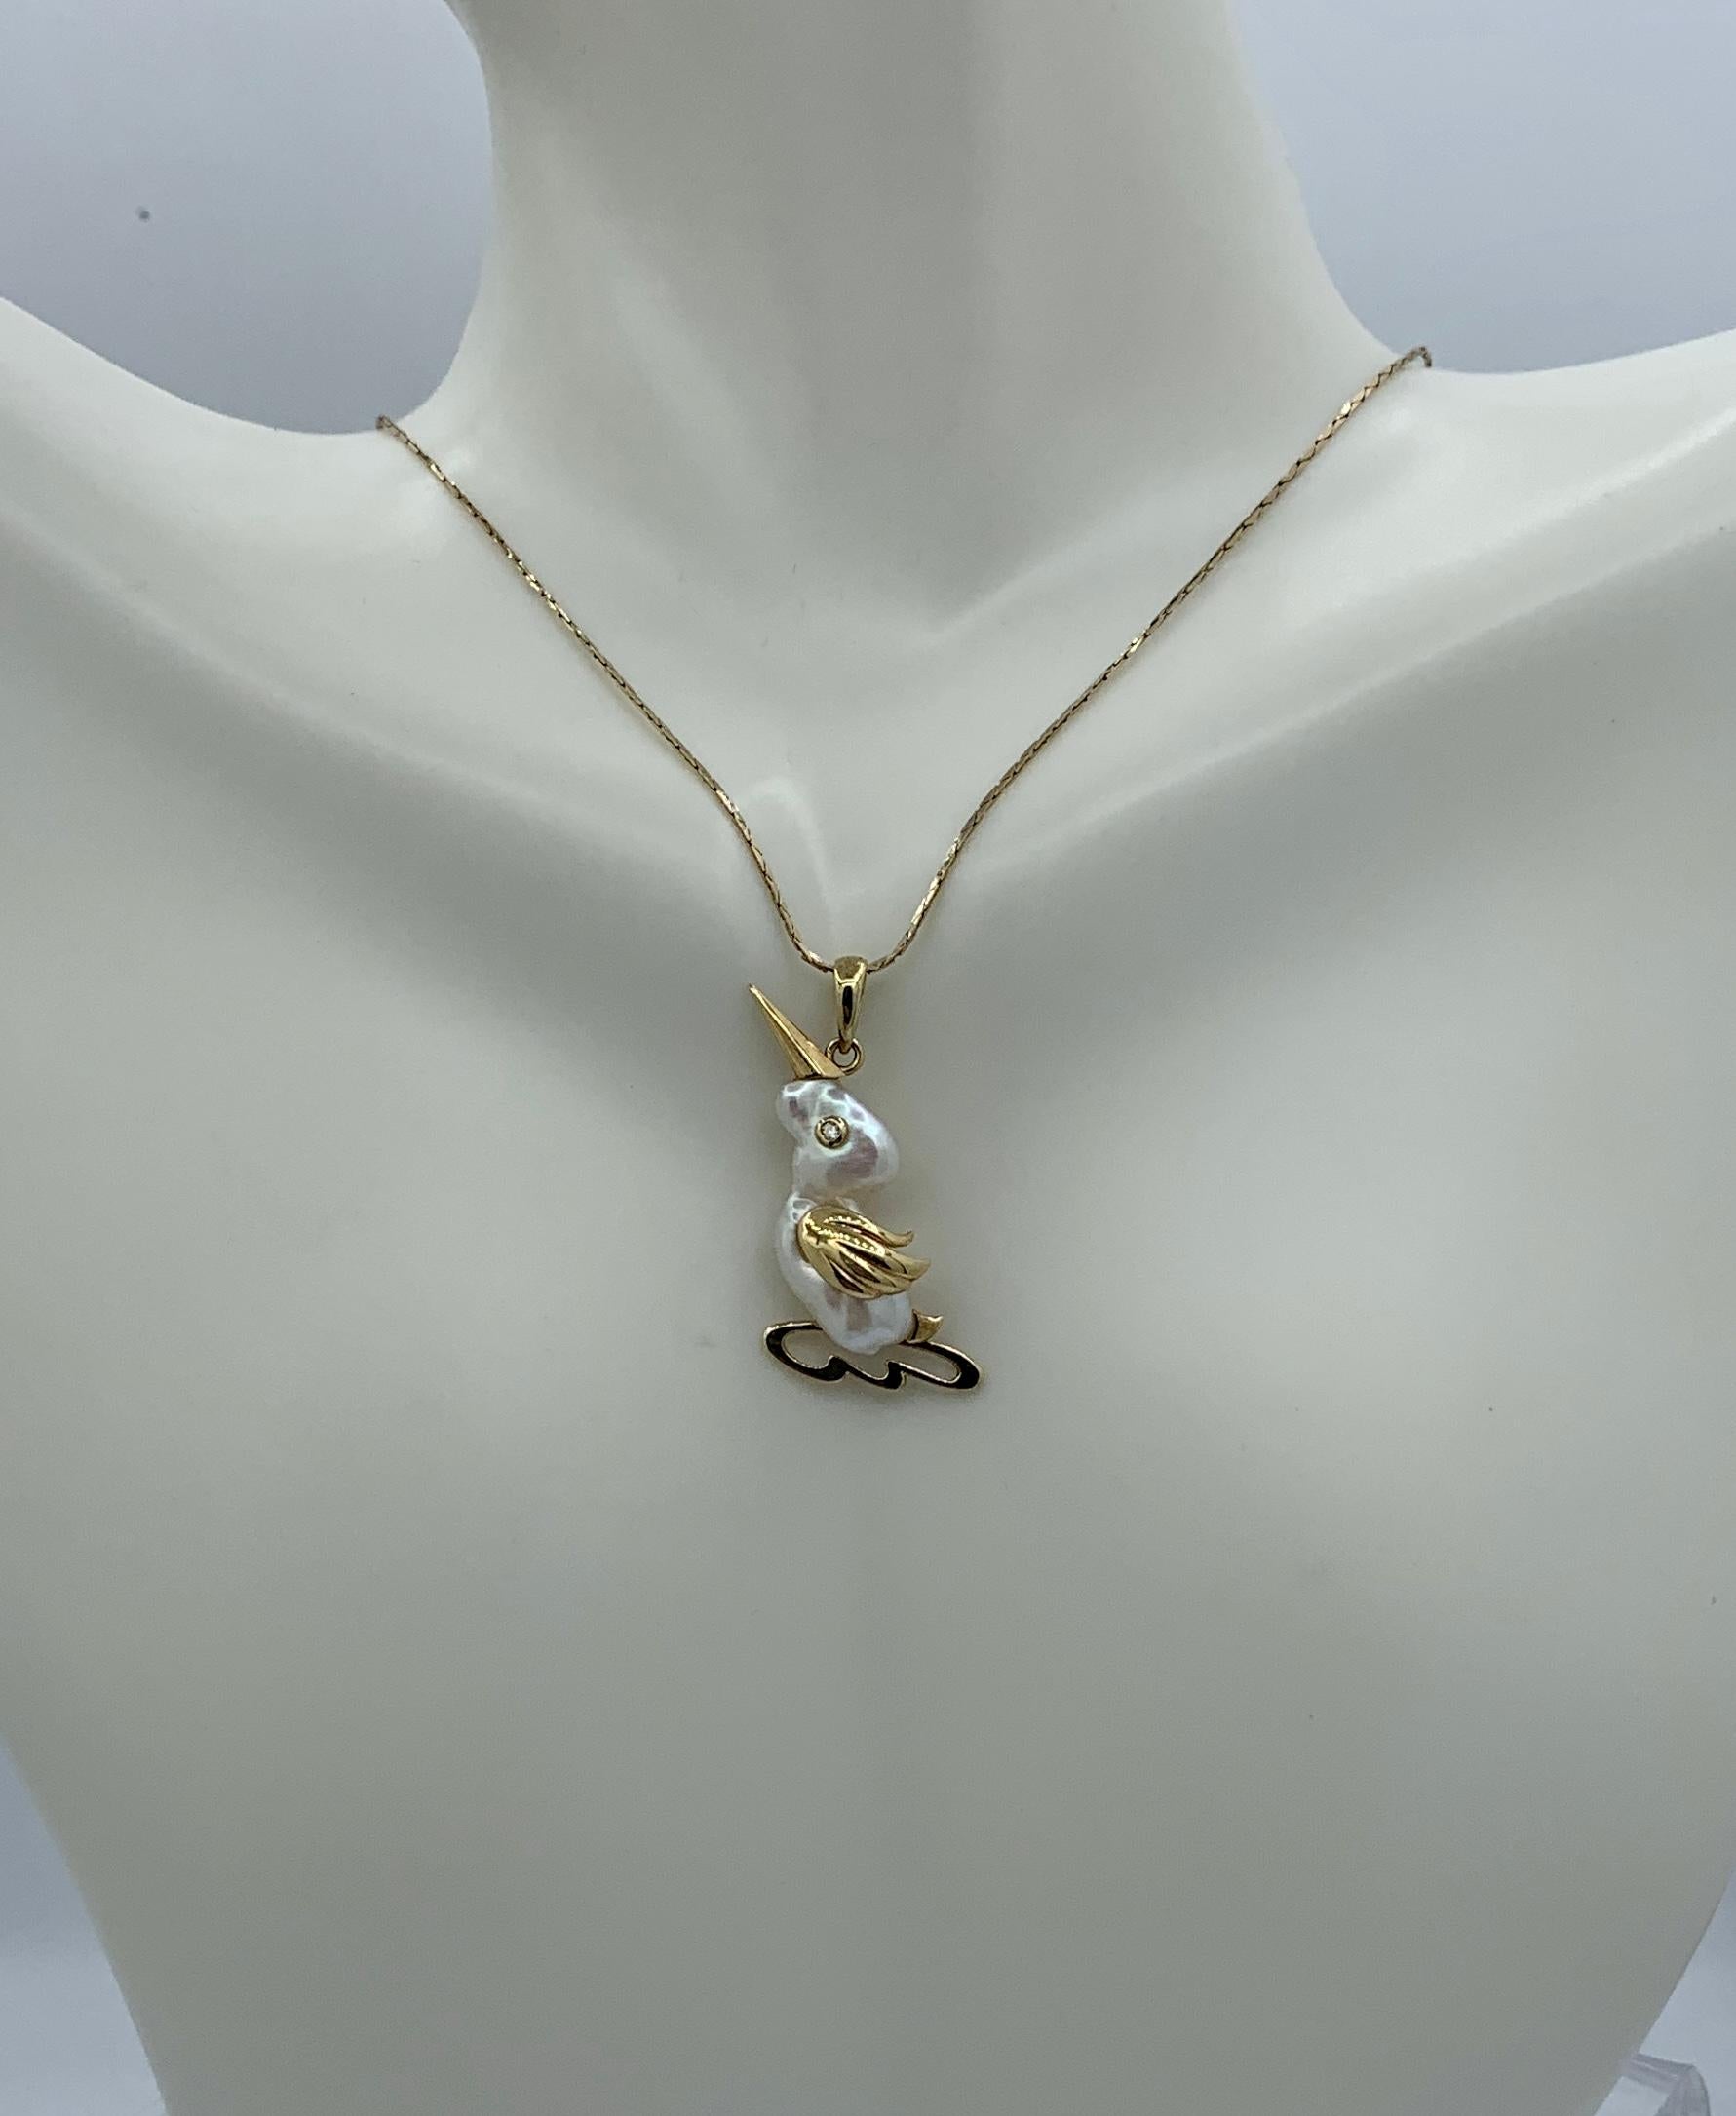 This is a wonderful Baroque Pearl and Diamond Pendant or Charm in the form of a fabulous Bird or Duck in 14 Karat Yellow Gold.  The bird is absolutely charming and has wonderful details in the elegant gold work.  A magnificent natural Baroque Pearl